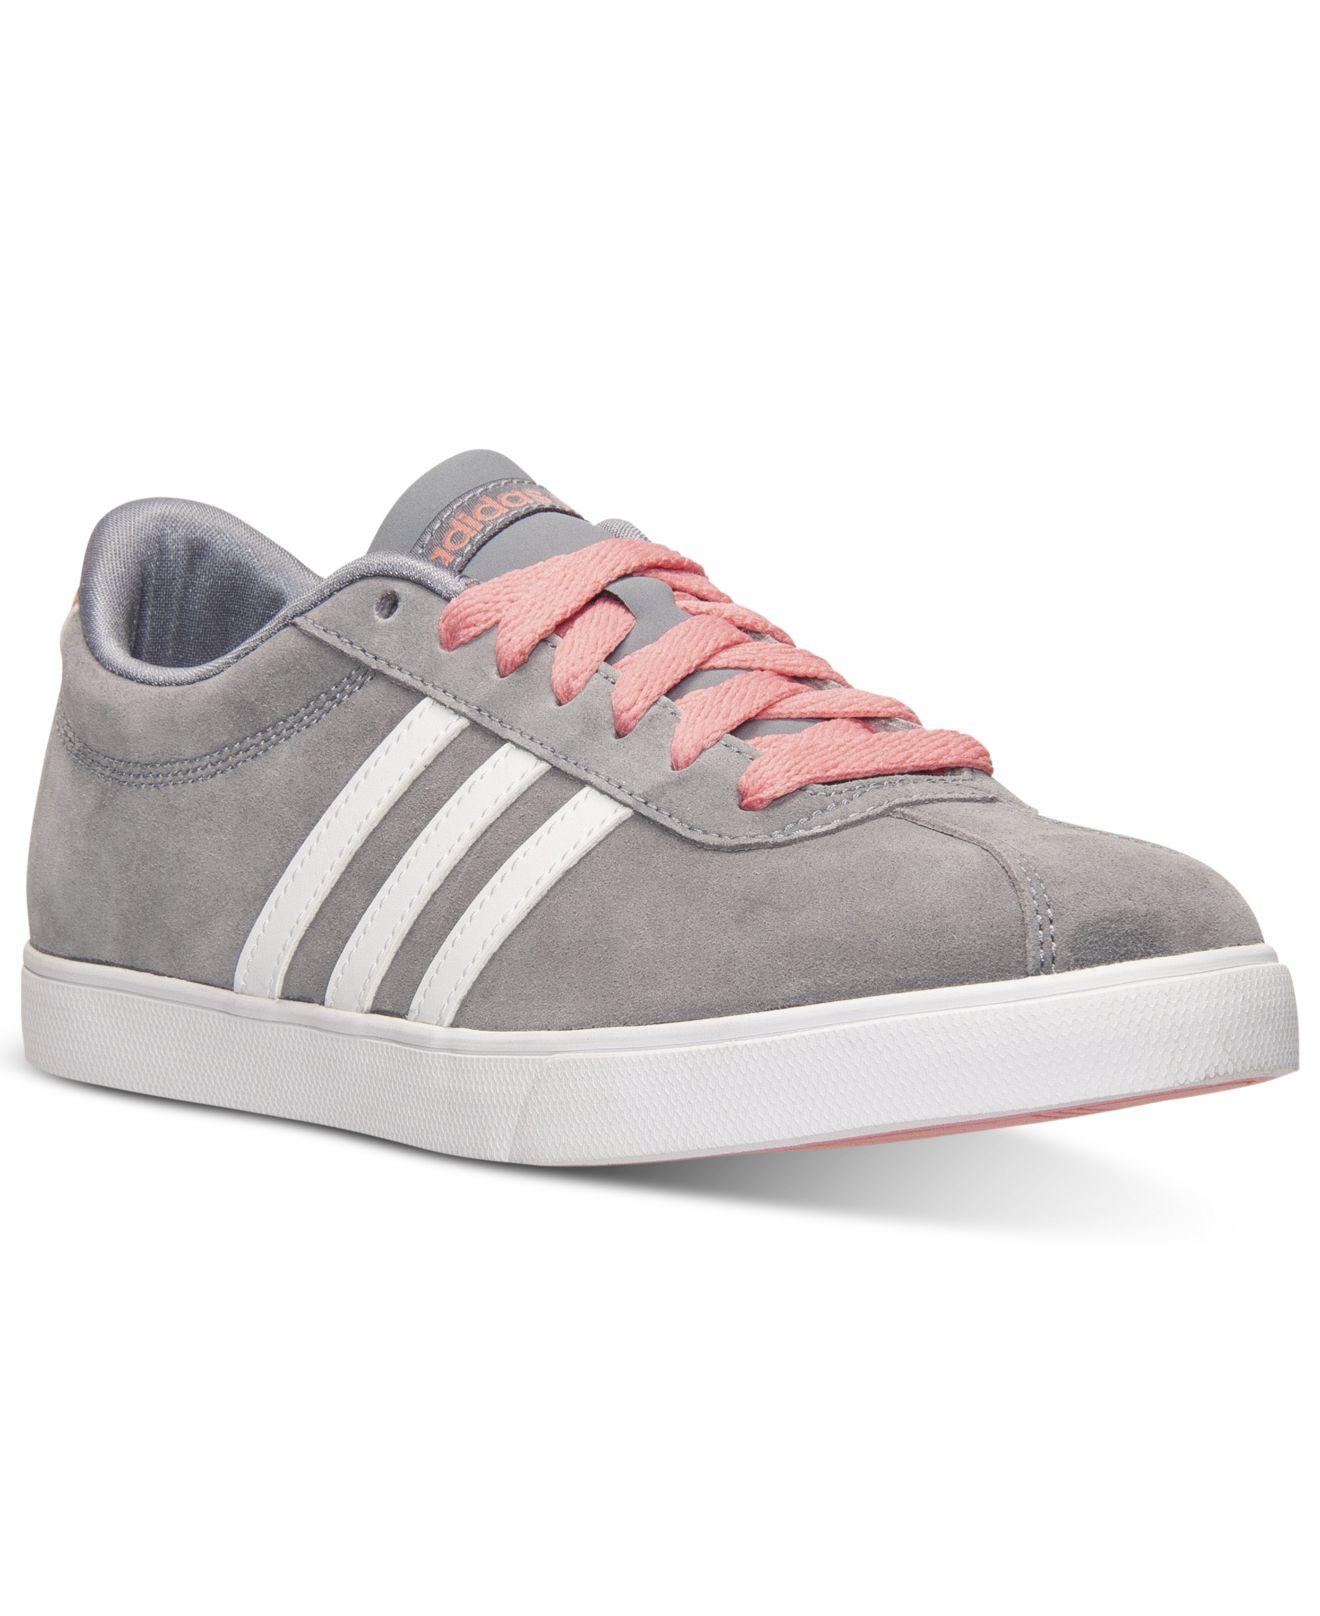 adidas suede trainers womens